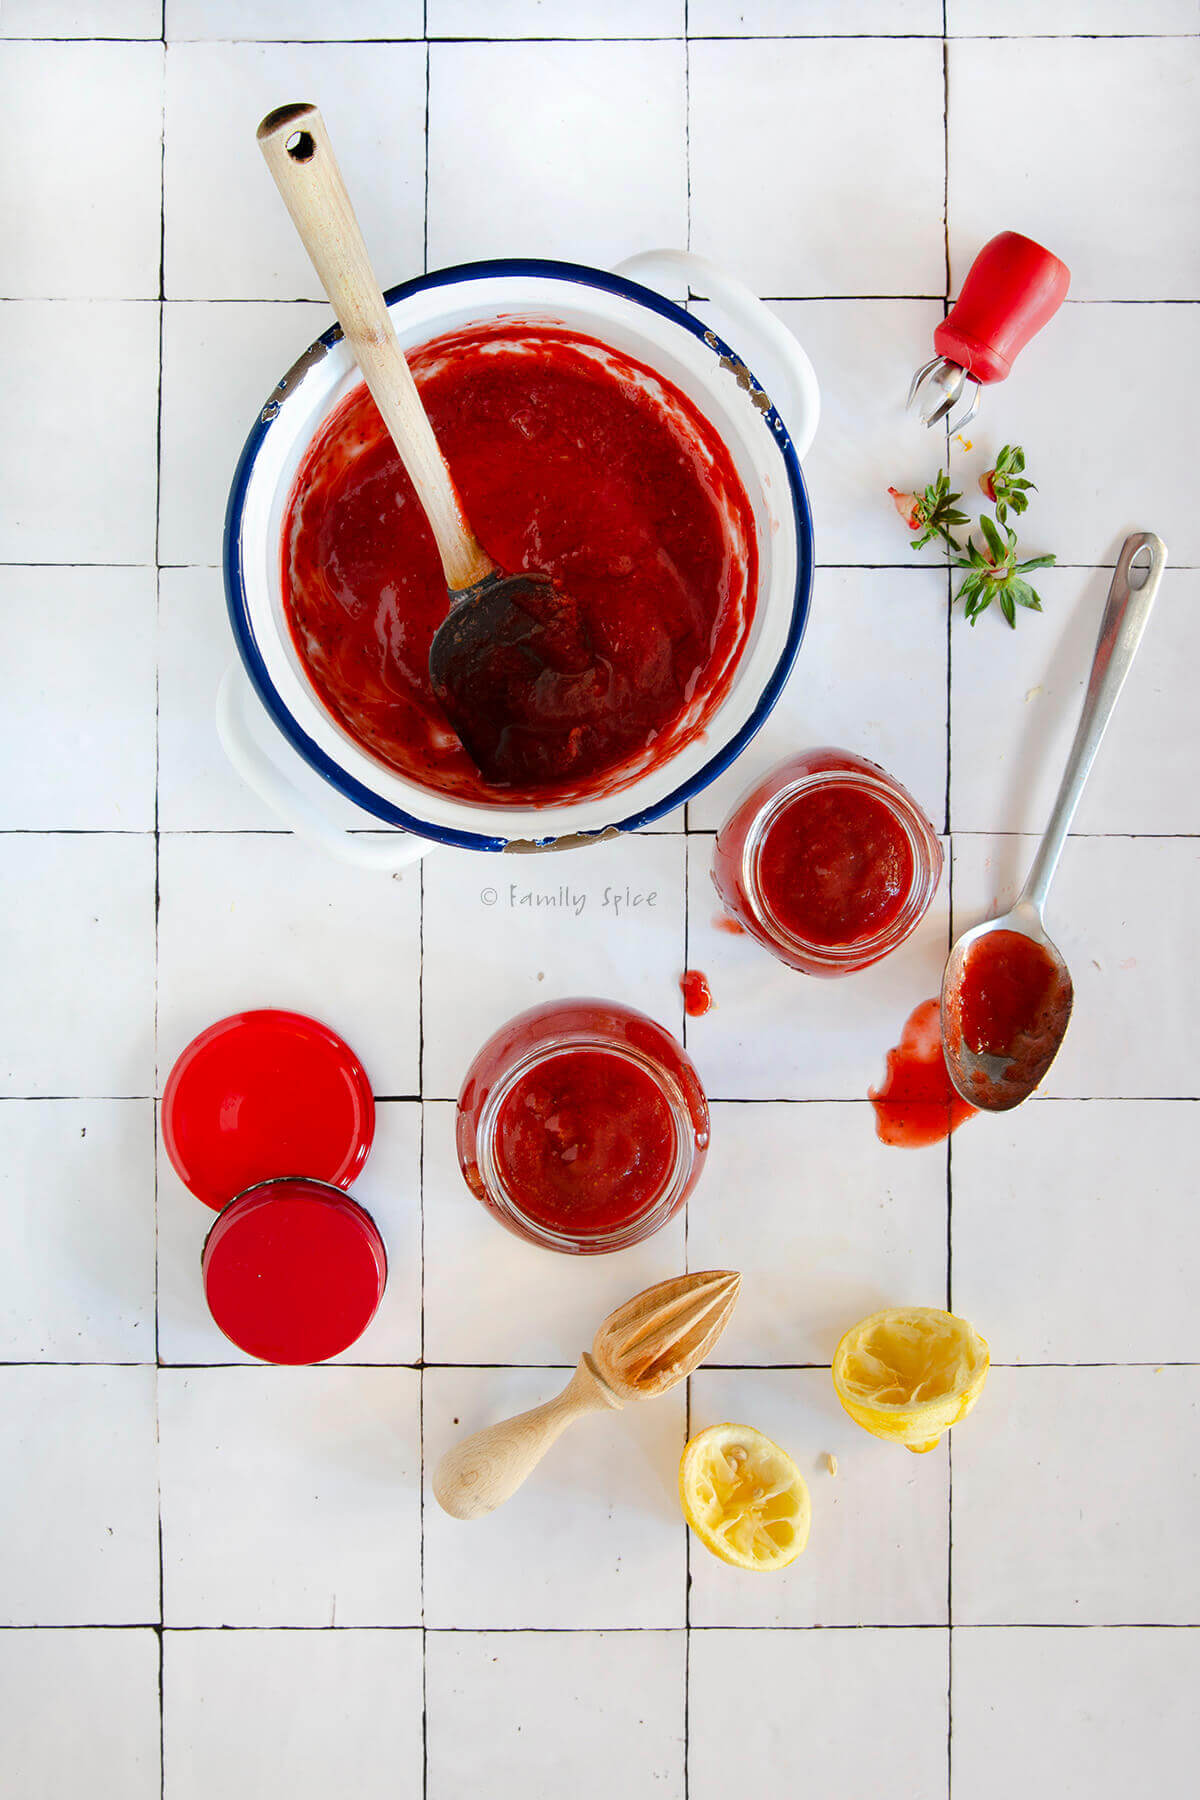 Top view of a pot of strawberry jam along with jars of jam and other kitchen items